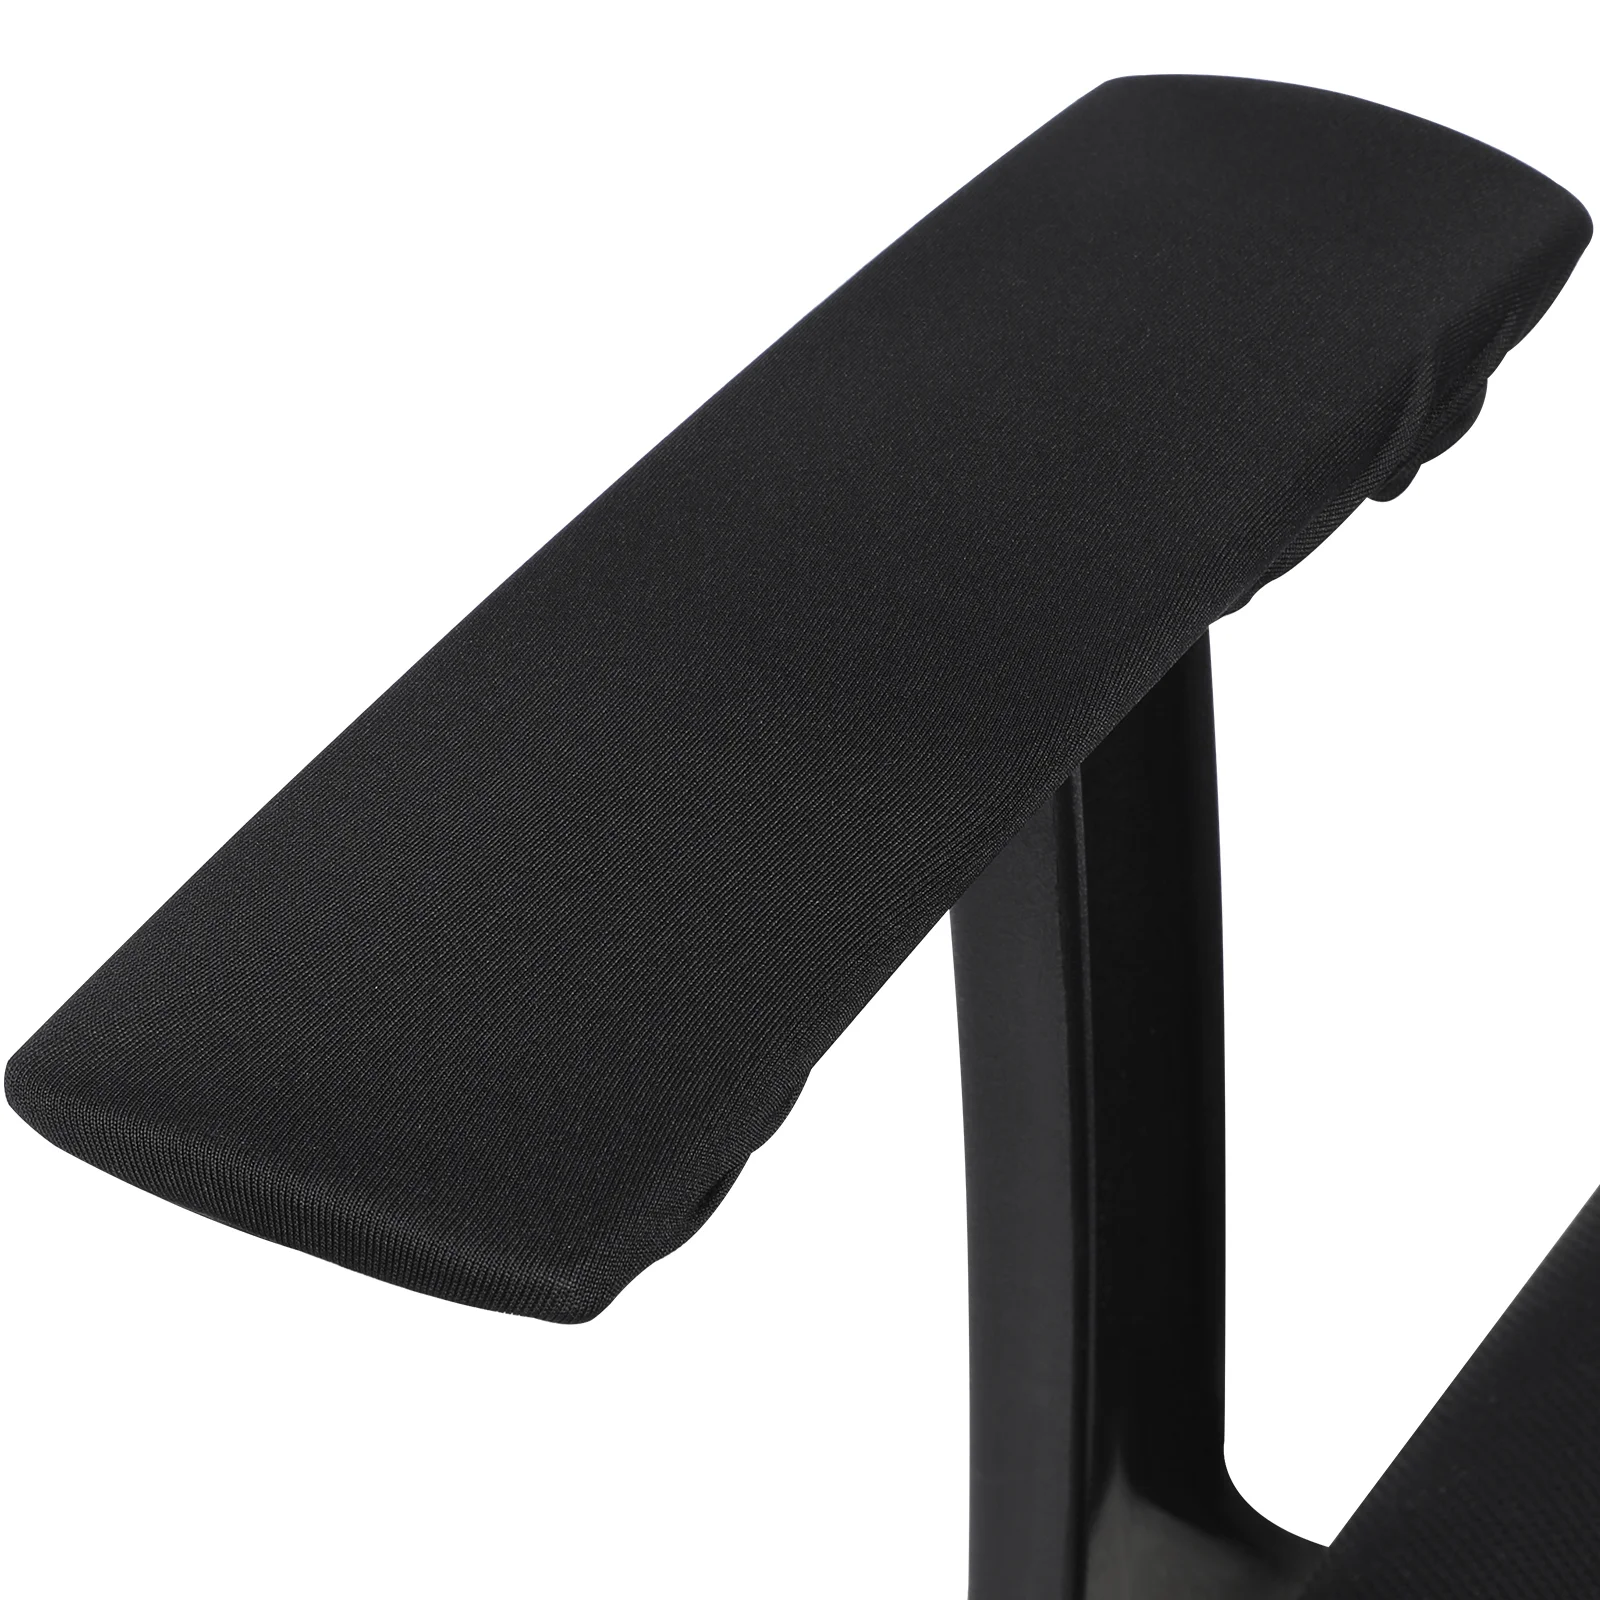 Black Elastic Band Computer Chair Arm Covers Protectors for Desk Chair Rotating Chair,Length-25-39cm HOWDIA 4pcs Office Chair Armrest Covers 